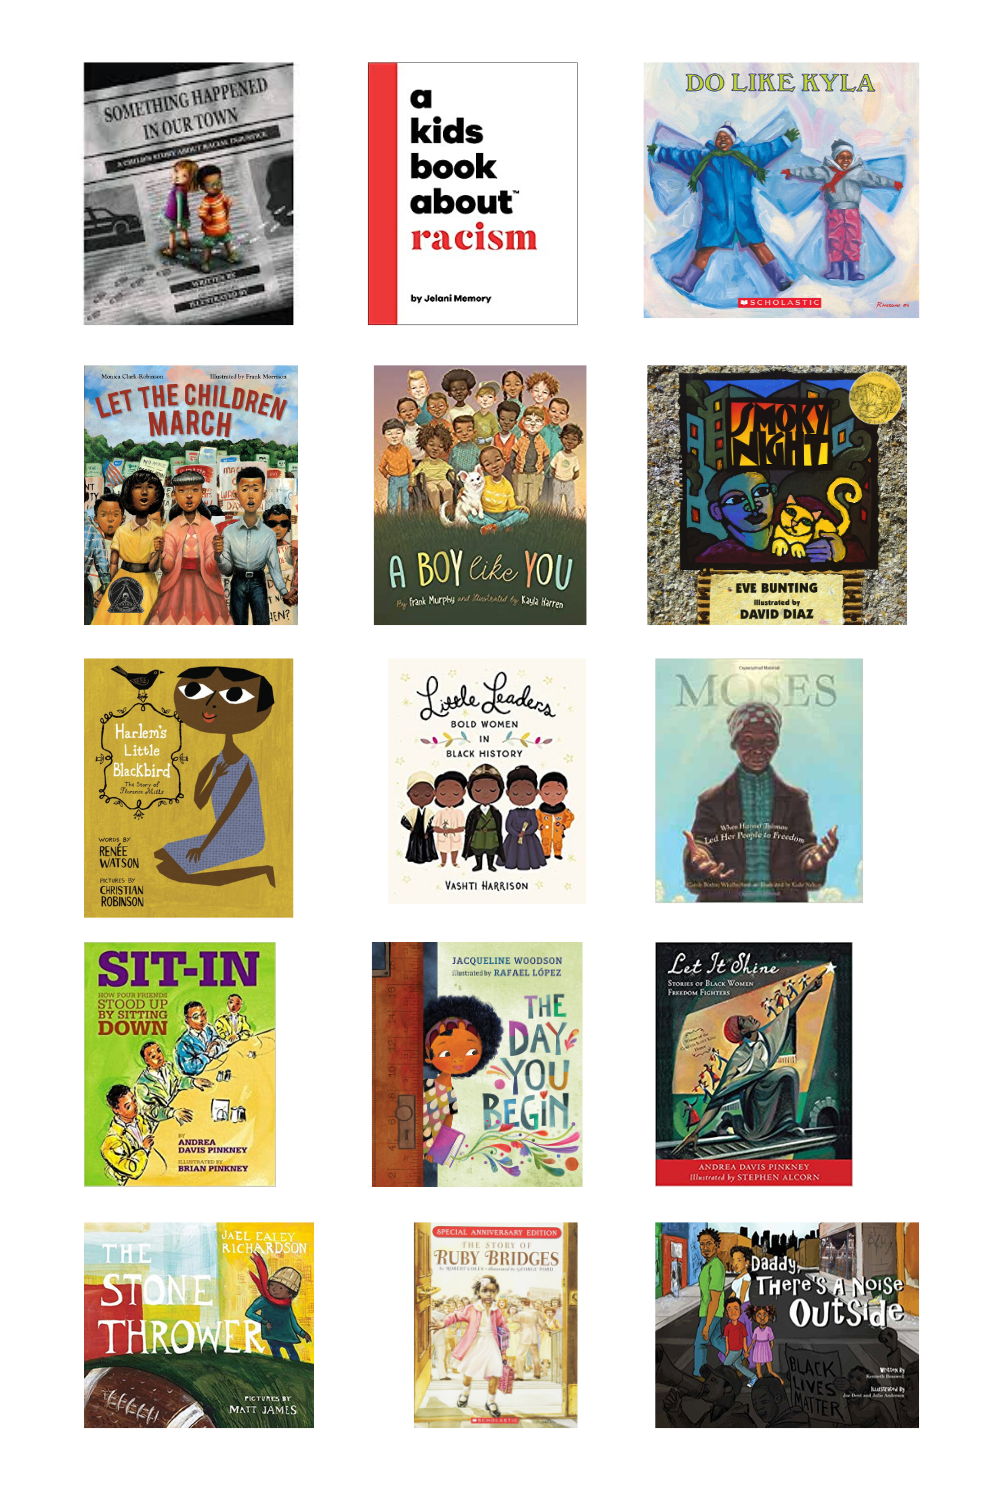 Children's books about race, racism and resistance